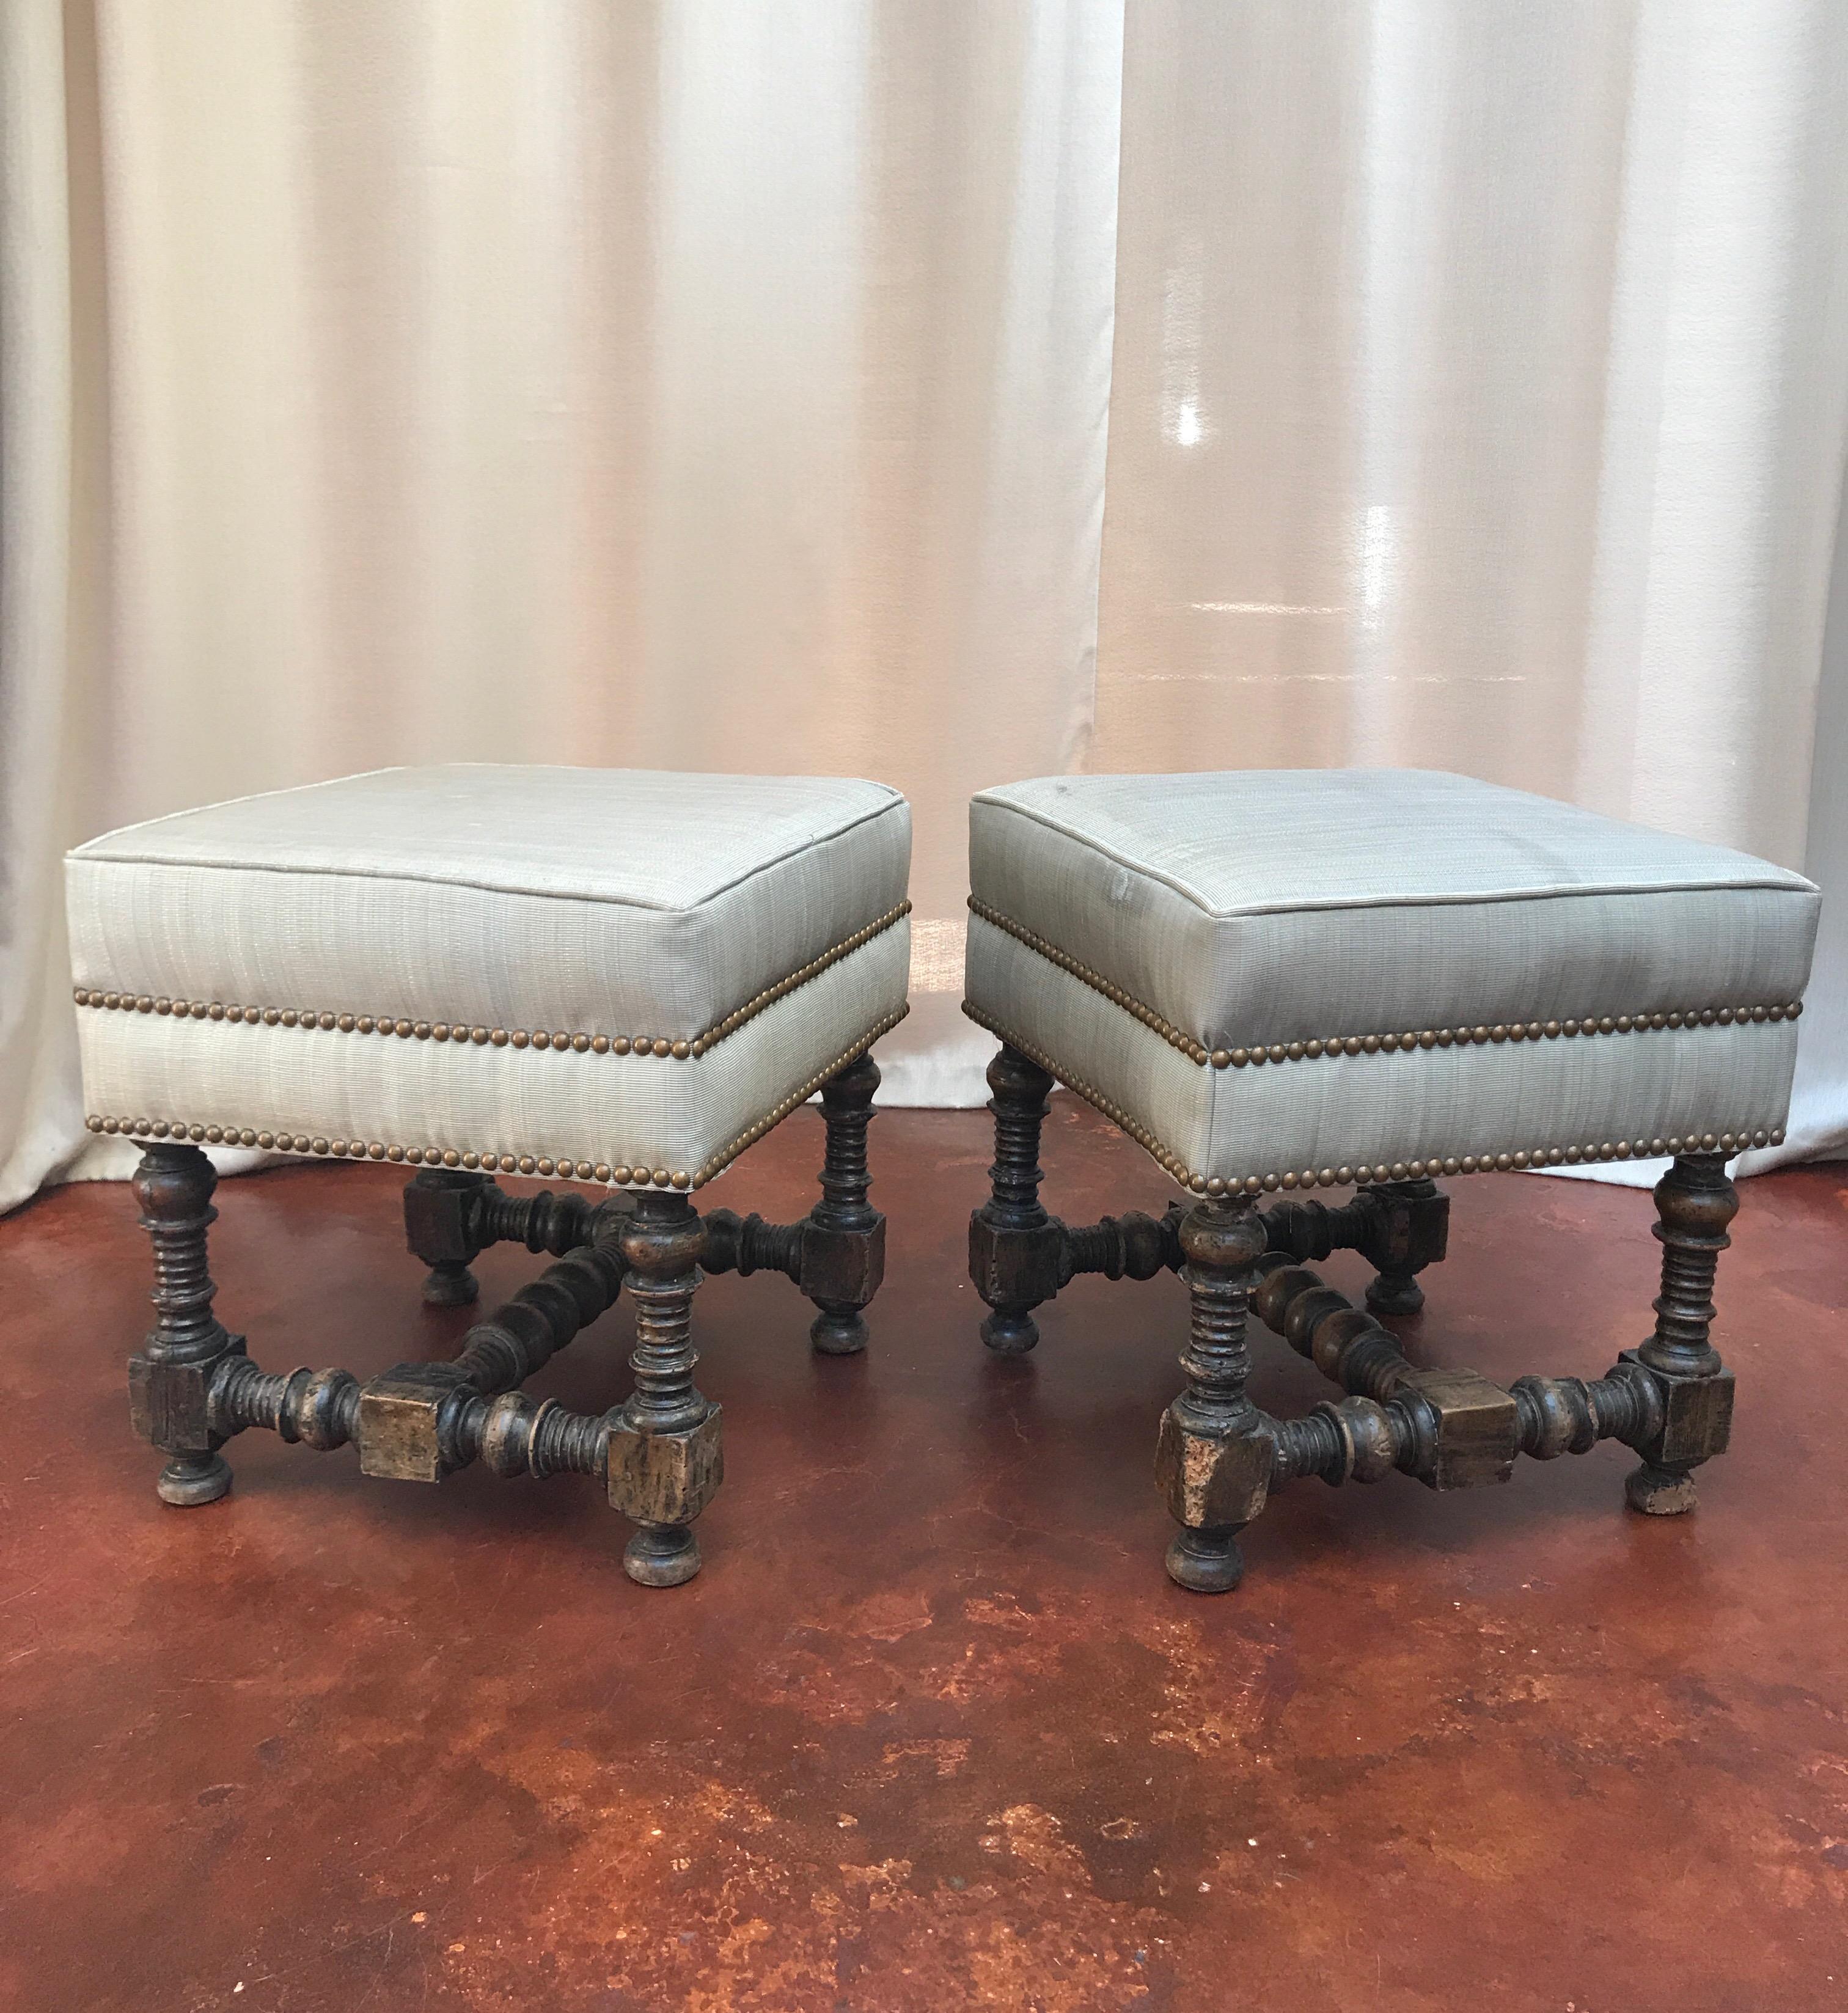 An early pair of Jacobean walnut stools from the 18th century. They are covered in a light blue horse hair fabric with nail head trim with some spots on the coverings.  There is some damage to the wood but they are still sturdy and have a great look.